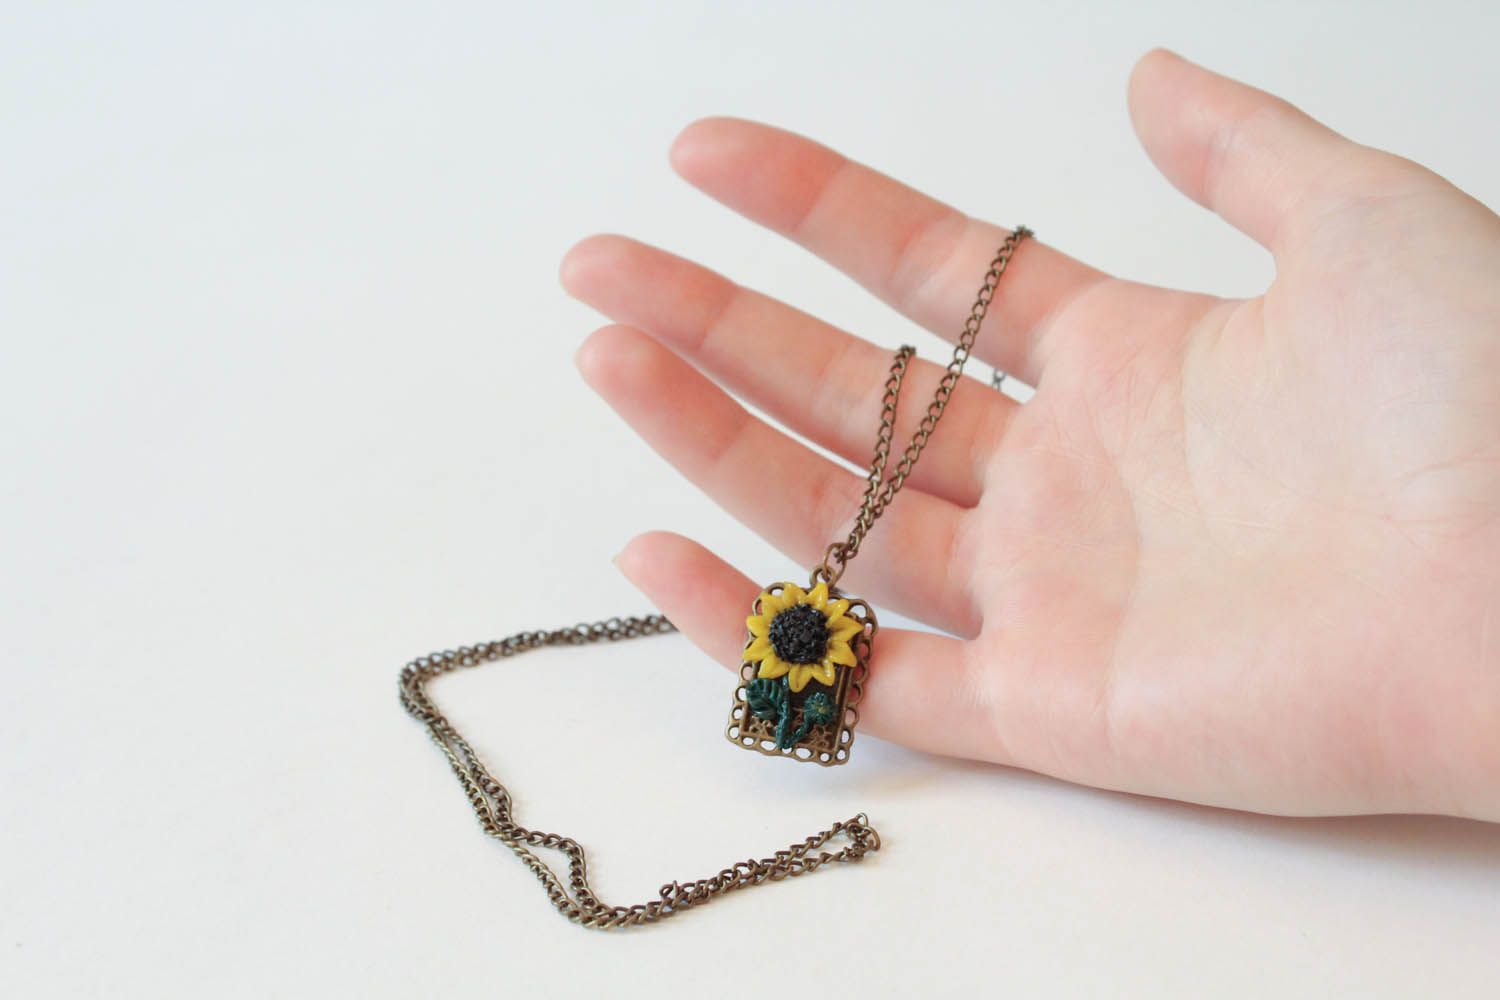 Pendant with sunflower made of polymer clay photo 1